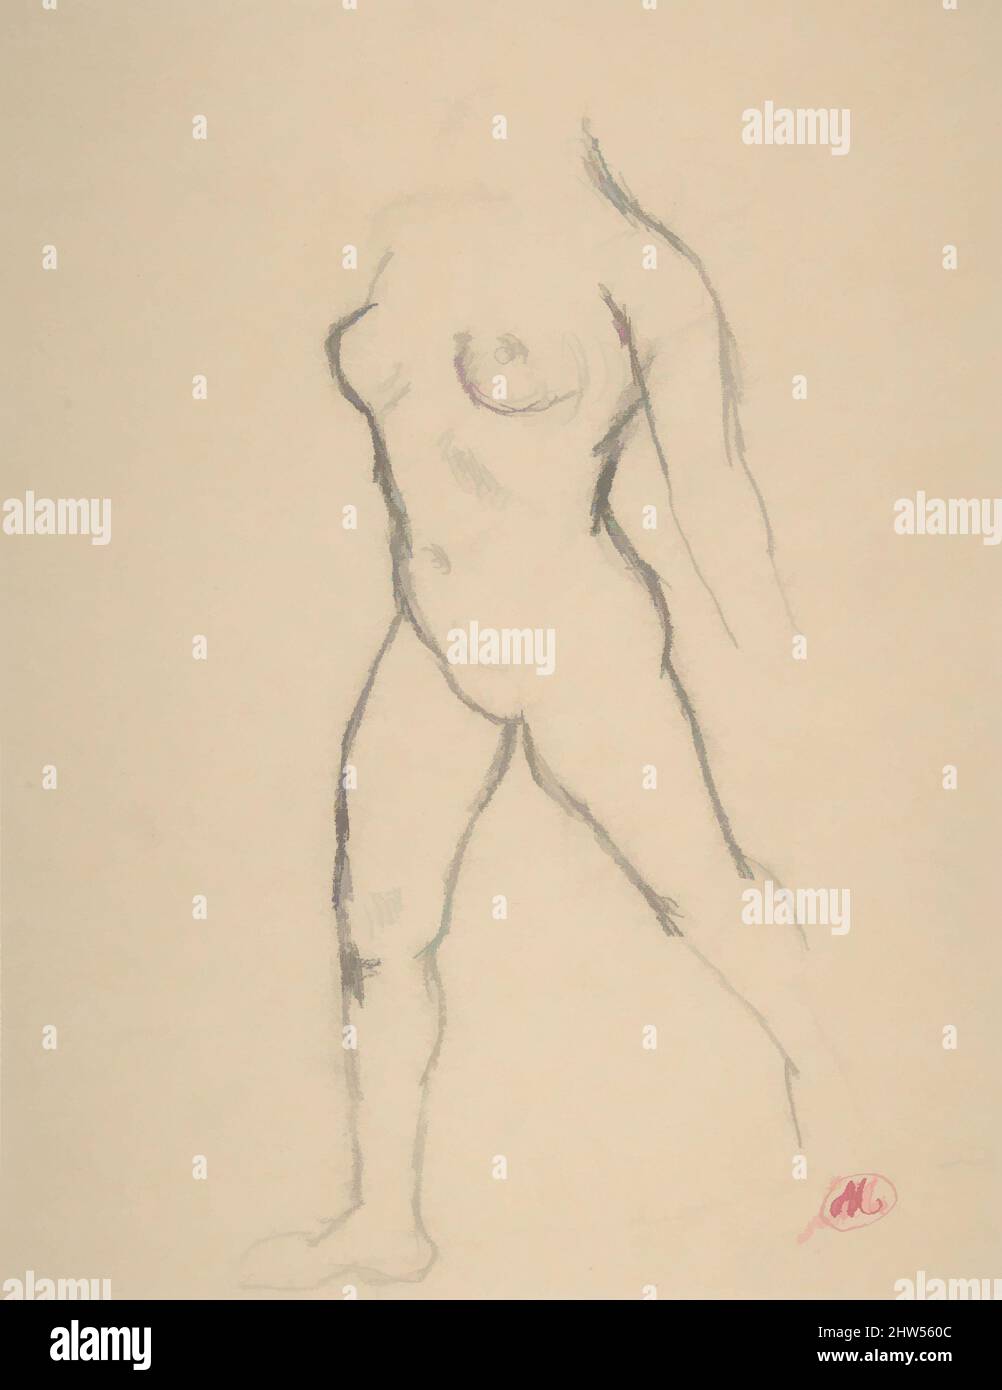 Art inspired by Study for 'Action in Chains (Monument to Louis-Auguste Blanqui)' or 'Île de France (Woman Walking in Water)', 1905-07, 1905–7, Black chalk on off-white wove paper, 12 1/2 x 9 3/4 in. (31.8 x 24.8 cm), Drawings, Aristide Maillol (French, Banyuls-sur-Mer 1861–1944, Classic works modernized by Artotop with a splash of modernity. Shapes, color and value, eye-catching visual impact on art. Emotions through freedom of artworks in a contemporary way. A timeless message pursuing a wildly creative new direction. Artists turning to the digital medium and creating the Artotop NFT Stock Photo